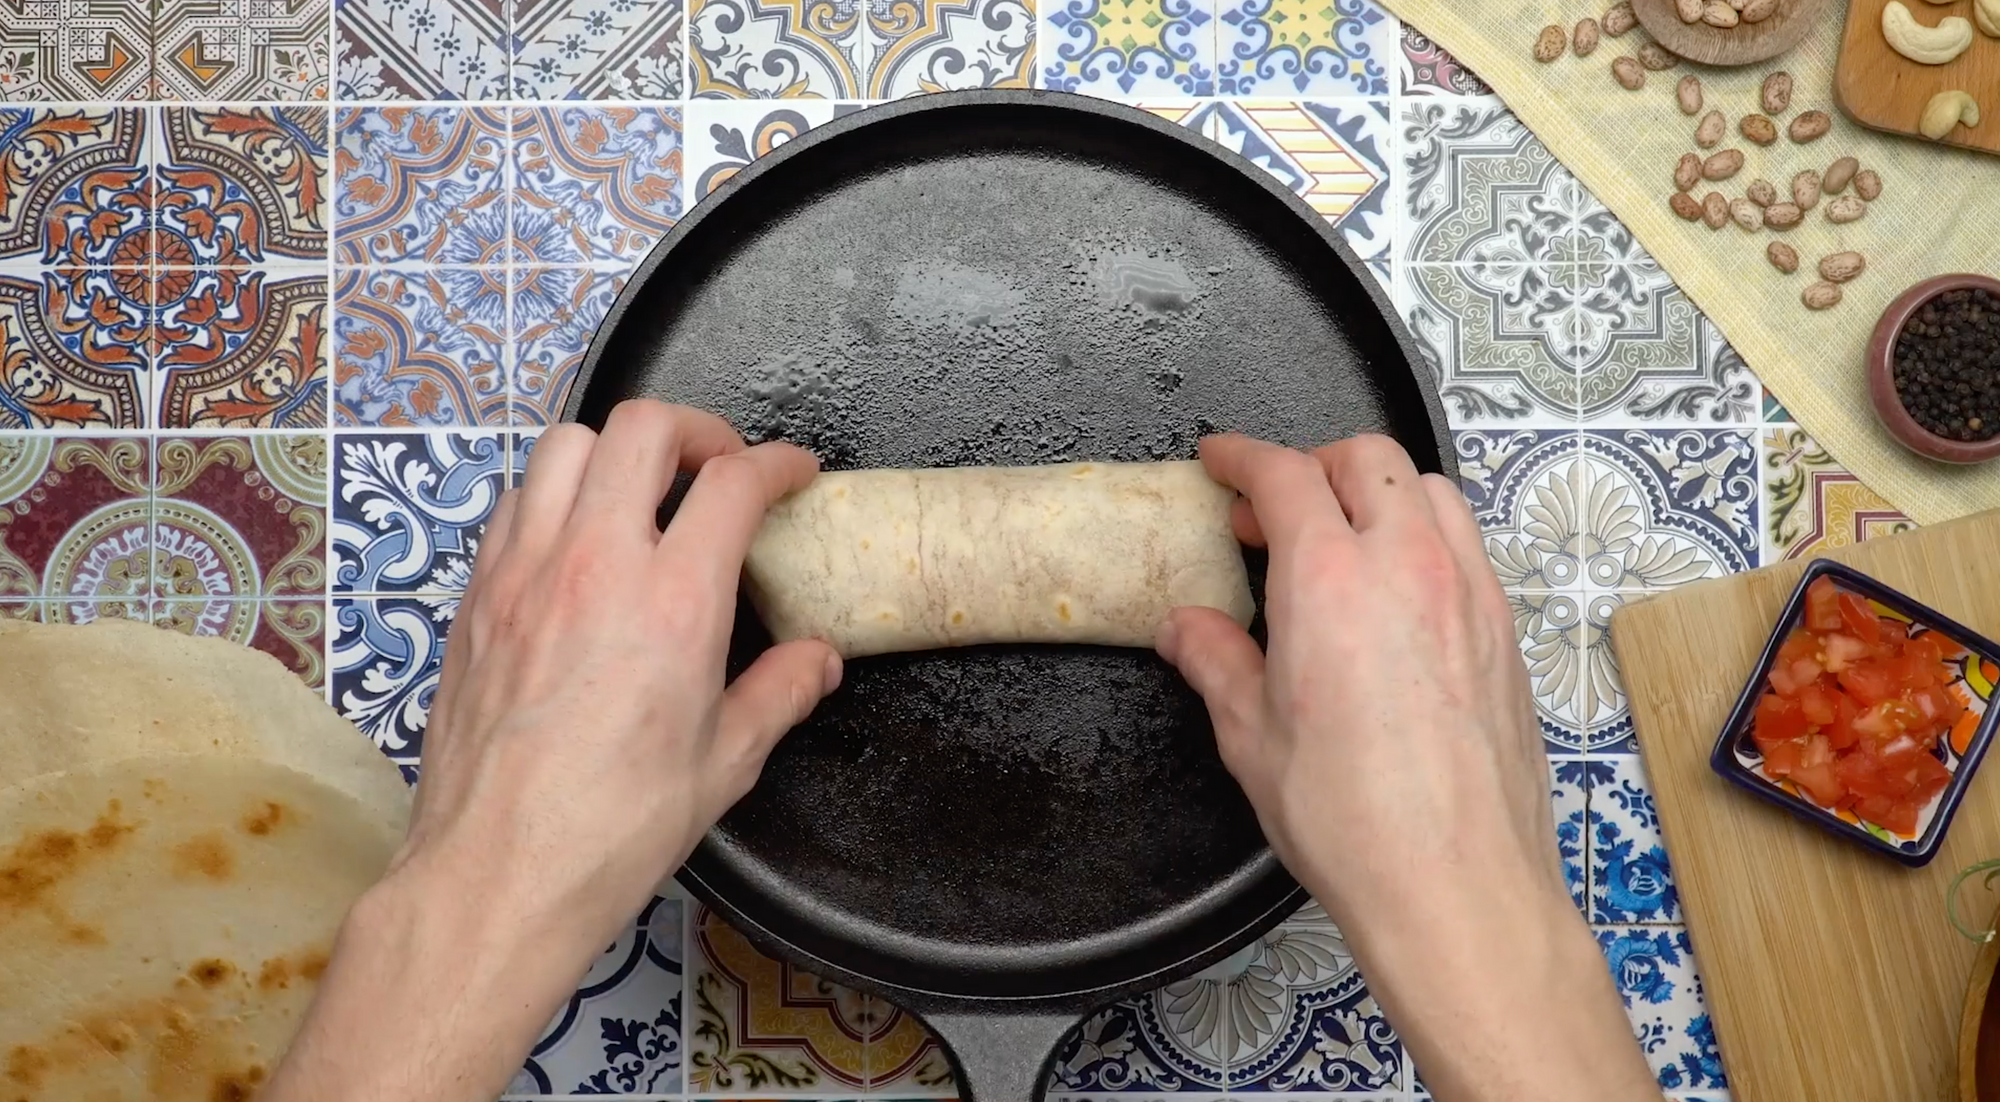 How to Heat & Roll Your Burrito